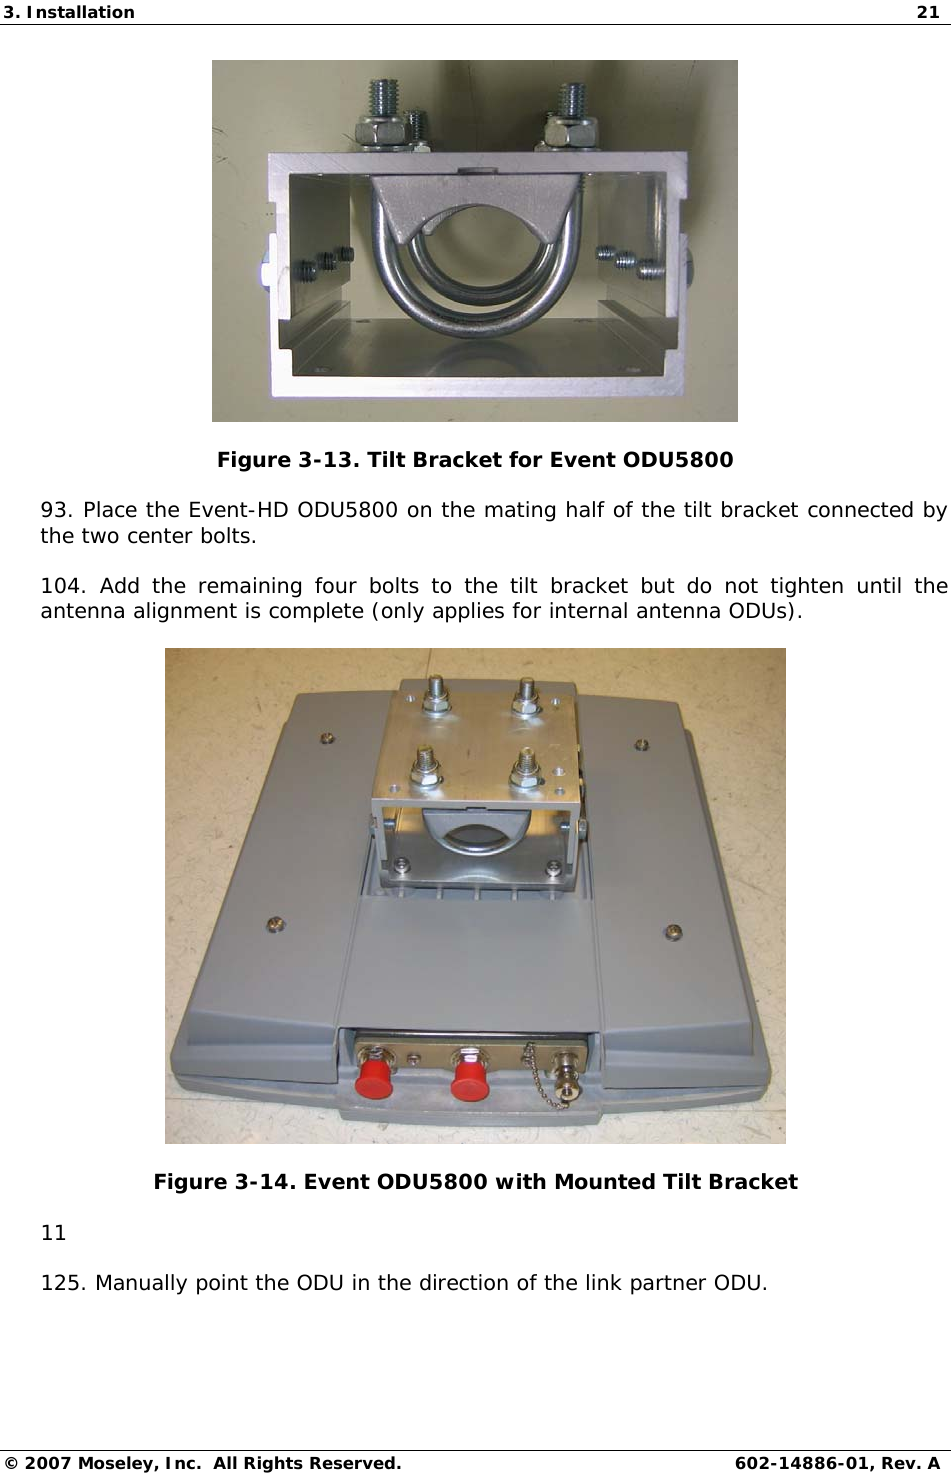 3. Installation  21 © 2007 Moseley, Inc.  All Rights Reserved.  602-14886-01, Rev. A  Figure 3-13. Tilt Bracket for Event ODU5800 93. Place the Event-HD ODU5800 on the mating half of the tilt bracket connected by the two center bolts.  104. Add the remaining four bolts to the tilt bracket but do not tighten until the antenna alignment is complete (only applies for internal antenna ODUs).   Figure 3-14. Event ODU5800 with Mounted Tilt Bracket  11 125. Manually point the ODU in the direction of the link partner ODU.    